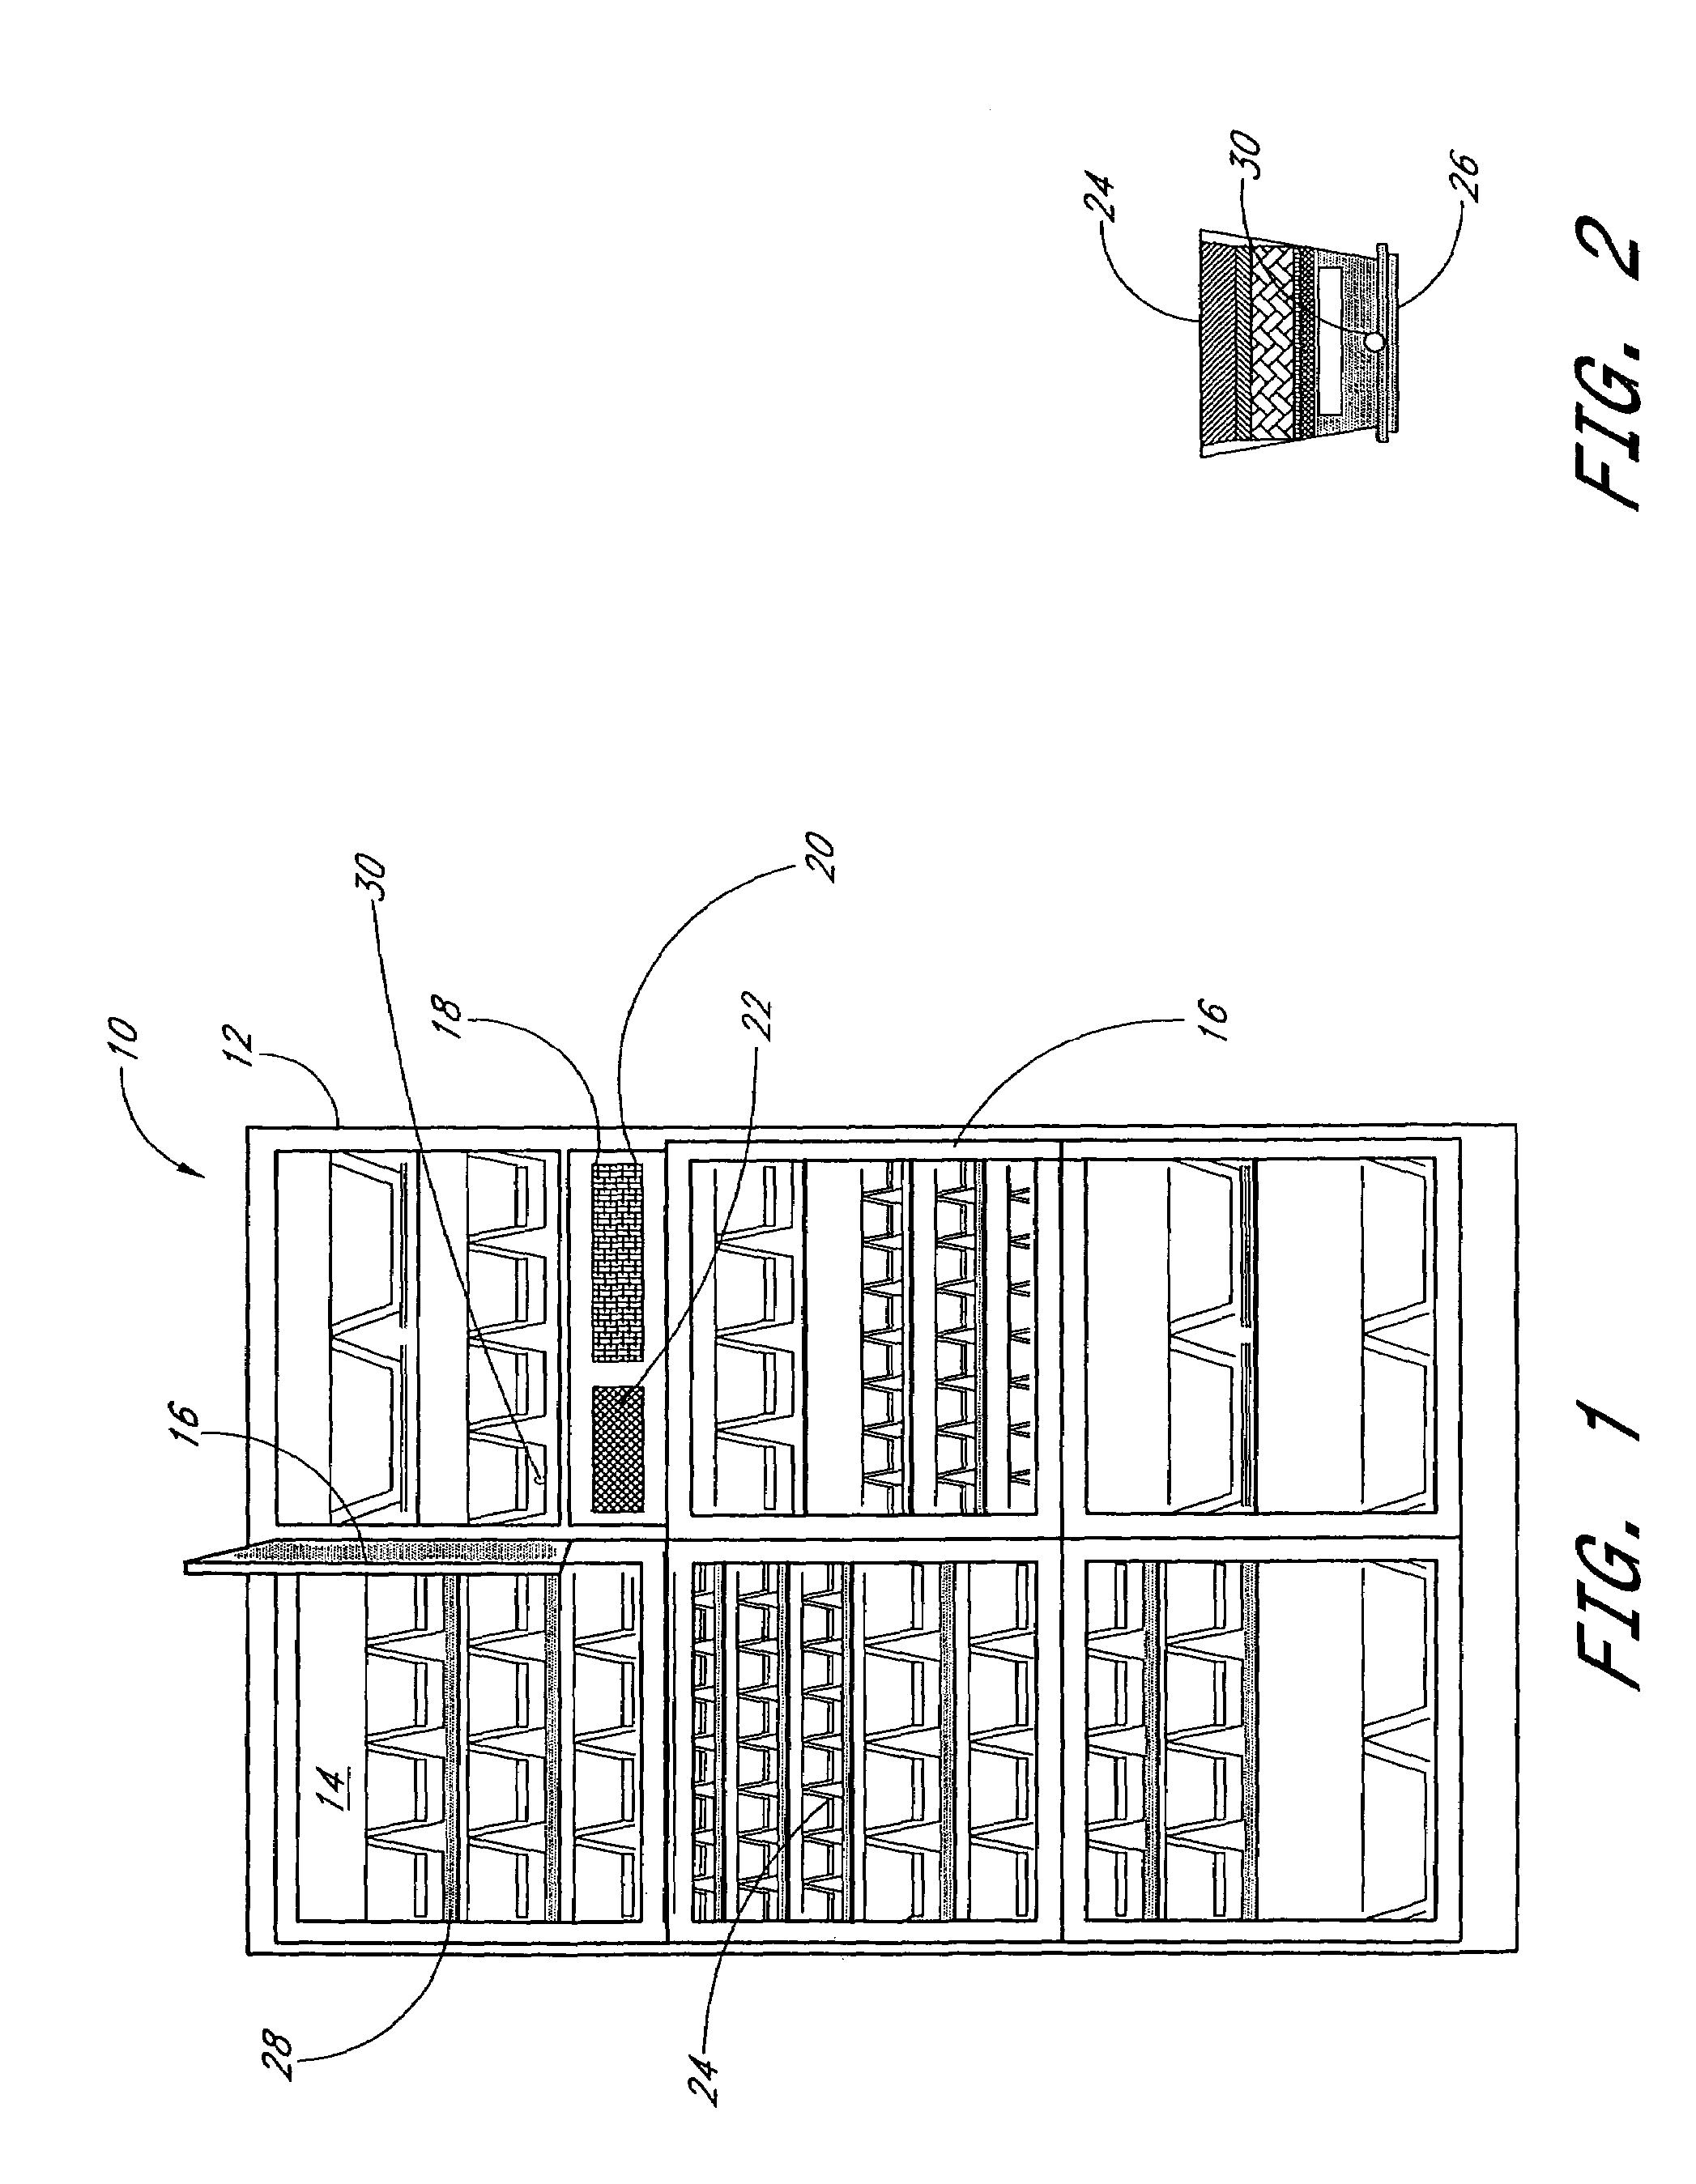 Controlled inventory device and method using pressure transducer